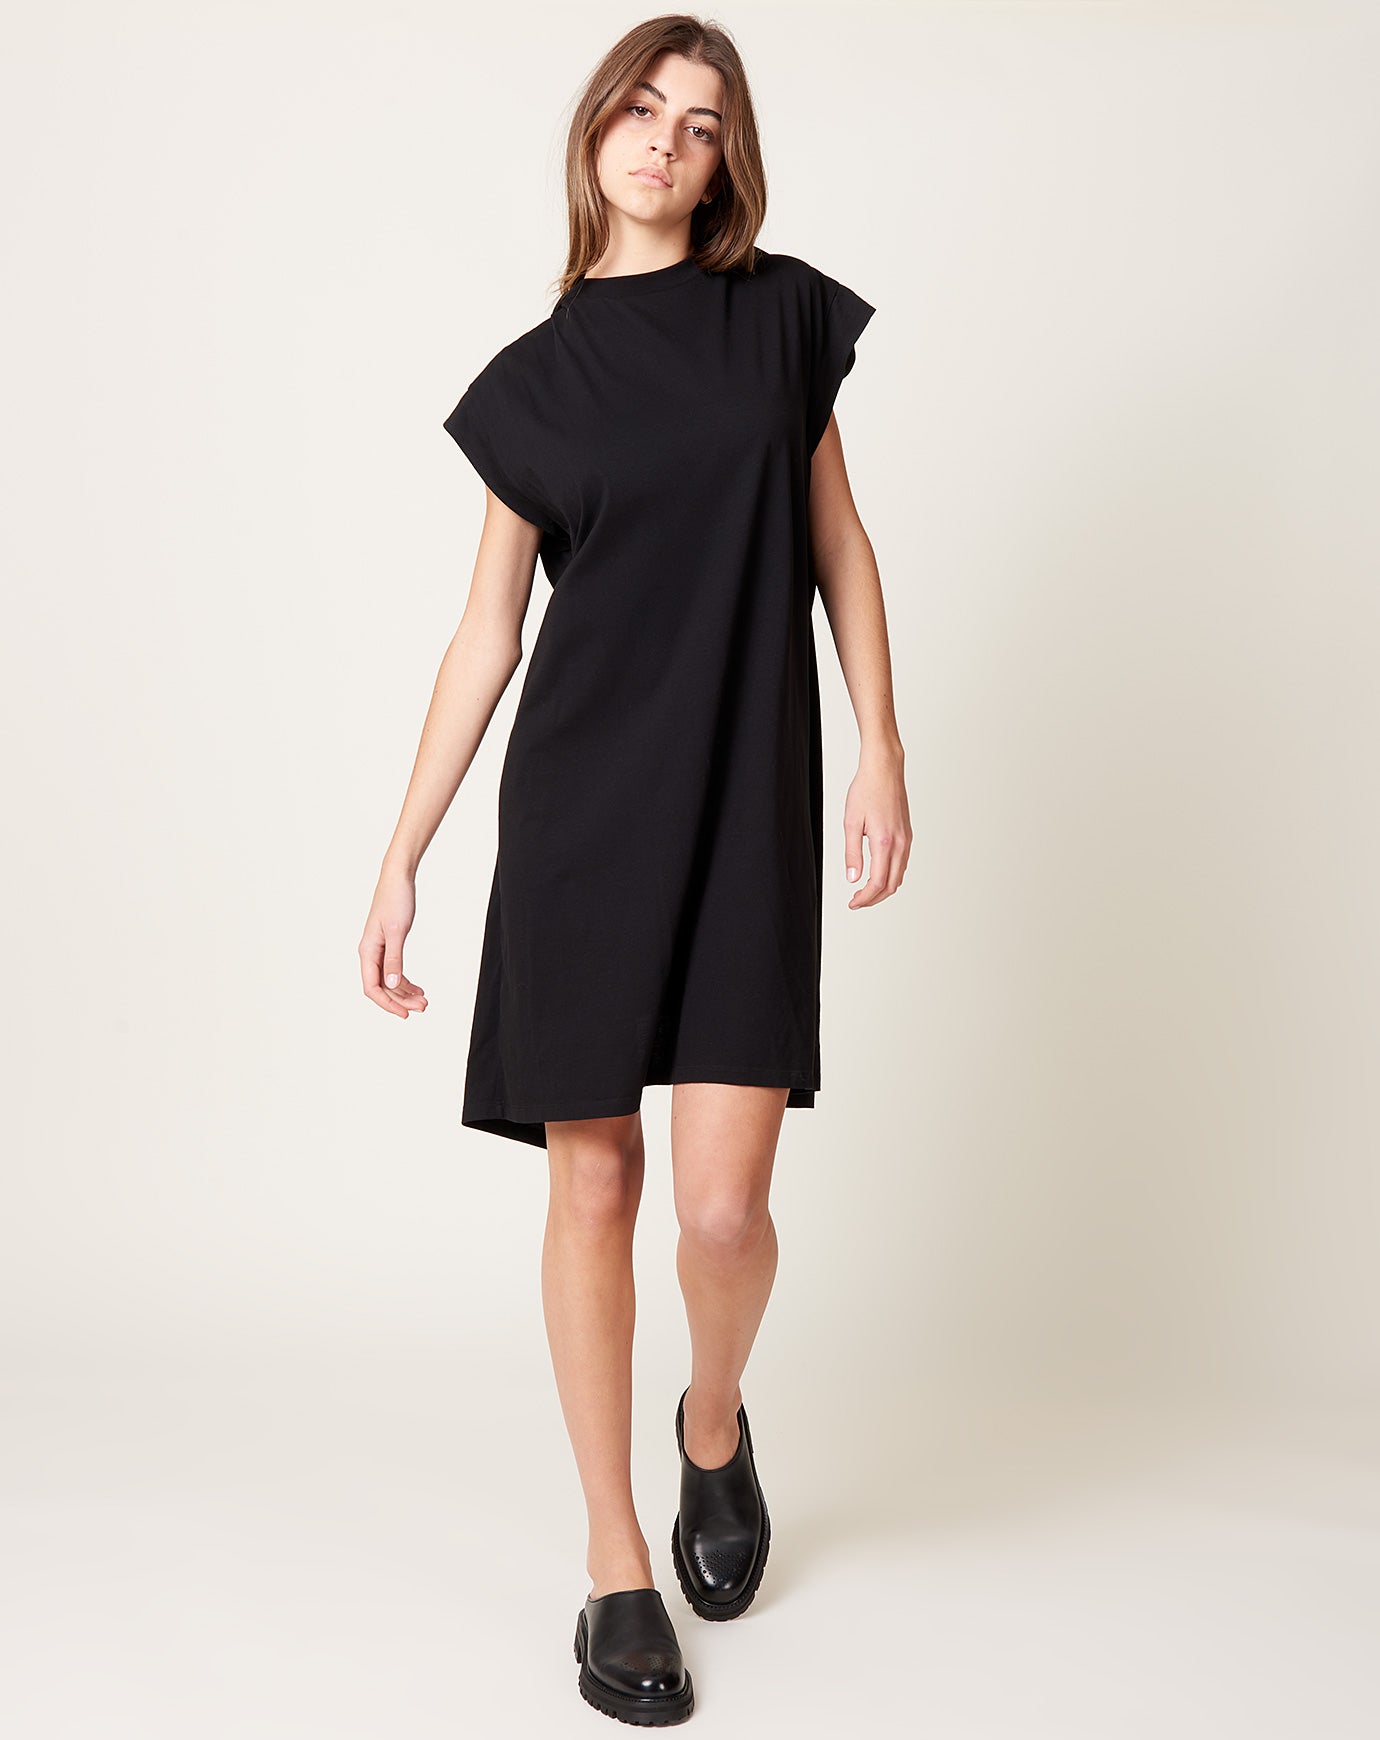 MM6 Two Way Dress in Black and White